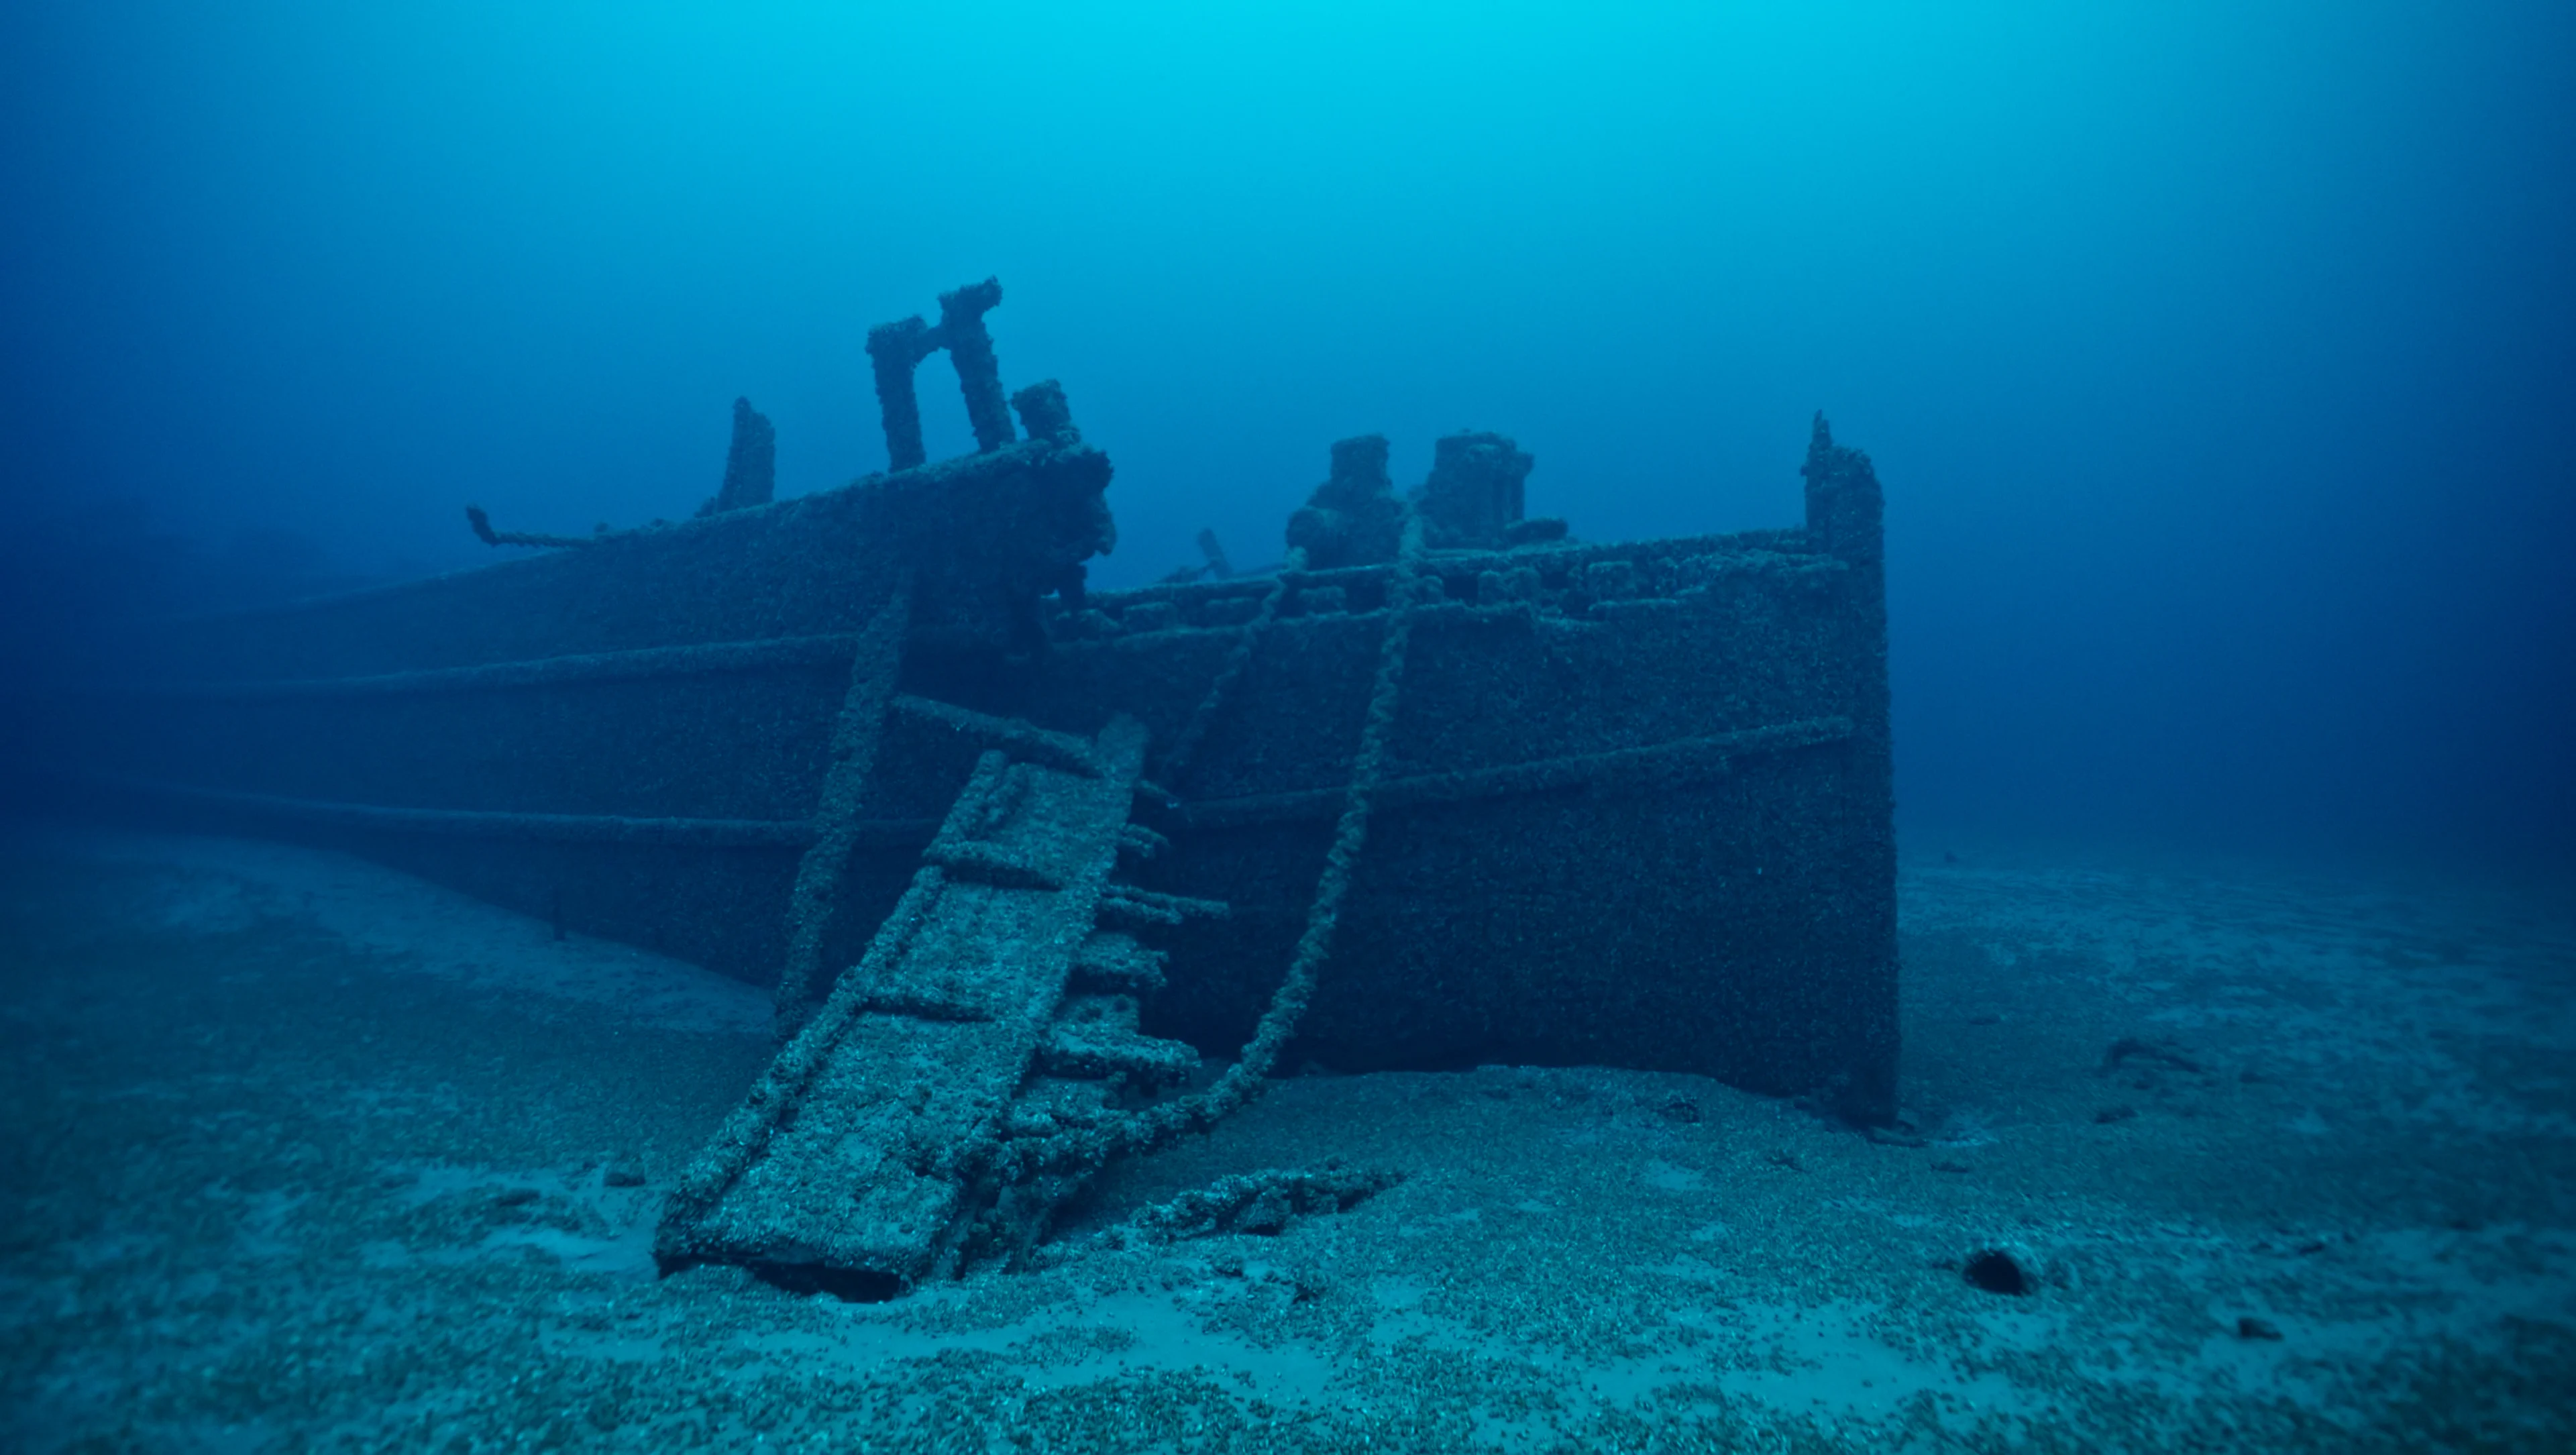 Canadian film crew uncovers century-old shipwreck in stunning Lake Huron find